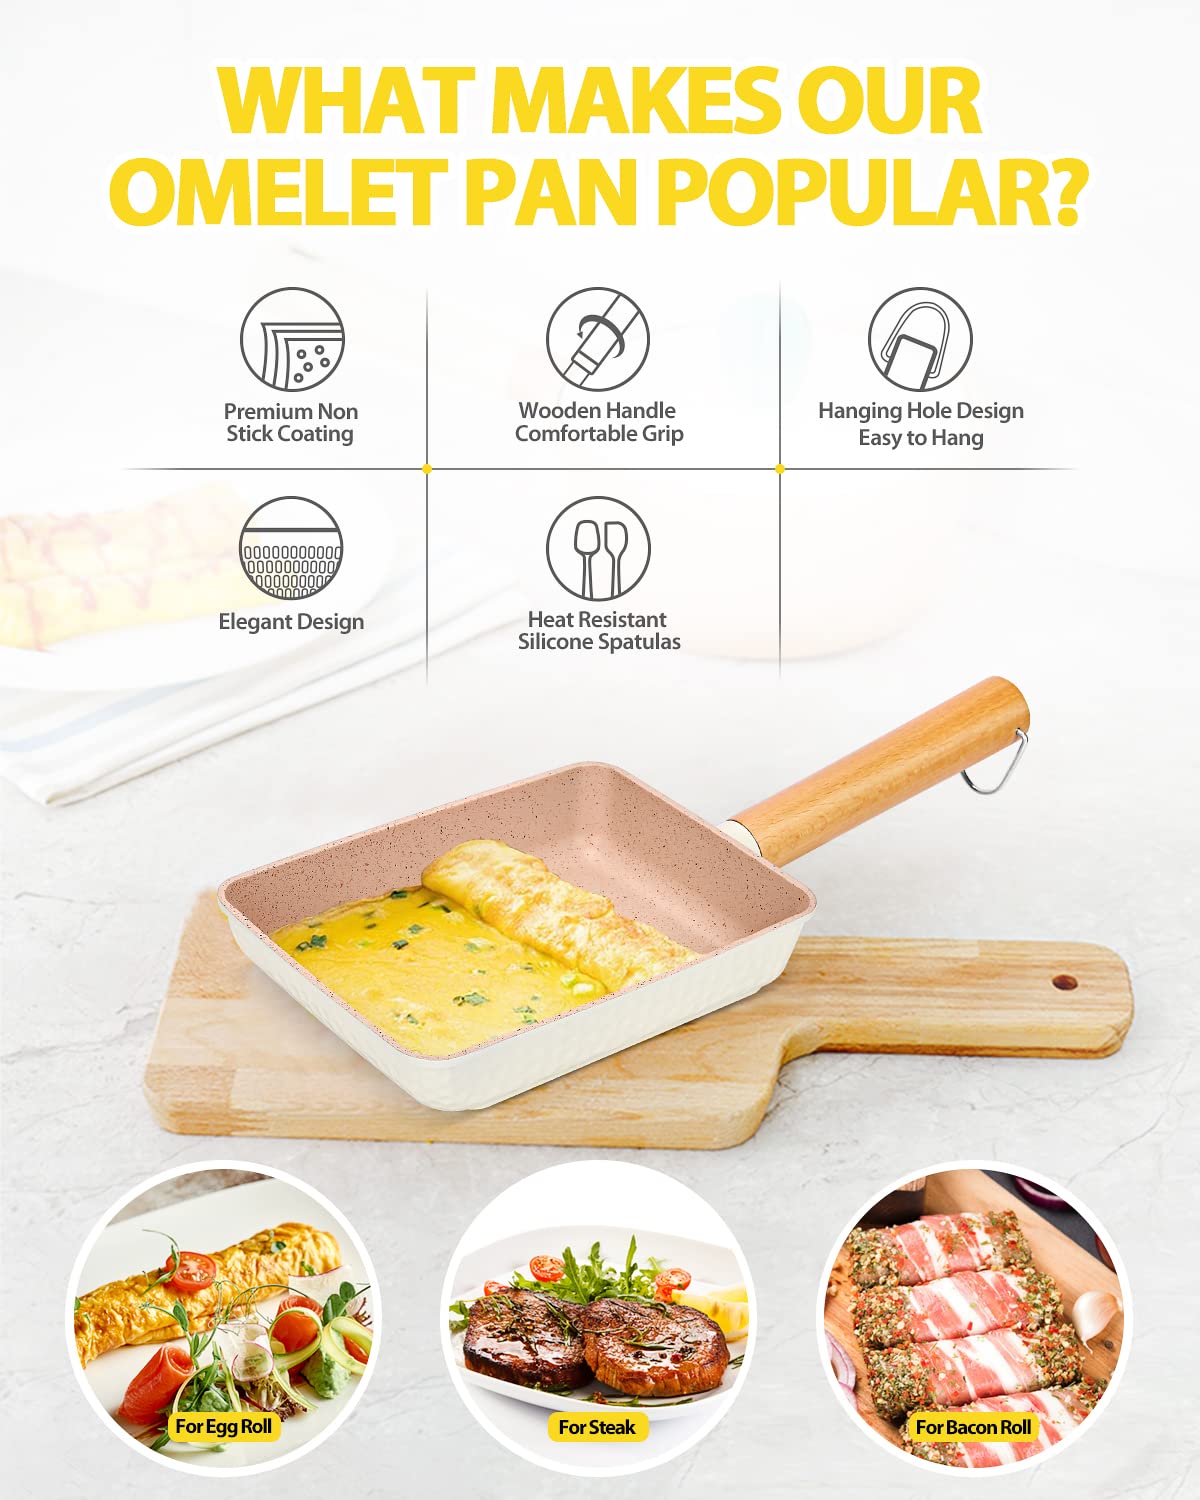 BUNDLEPRO Japanese Omelette Pan, Non Stick Tamagoyaki Eggs Frying Pan, Square Granite Cookware set, 7.1''Small Induction Skillet with Silicone Spatulas for Breakfast